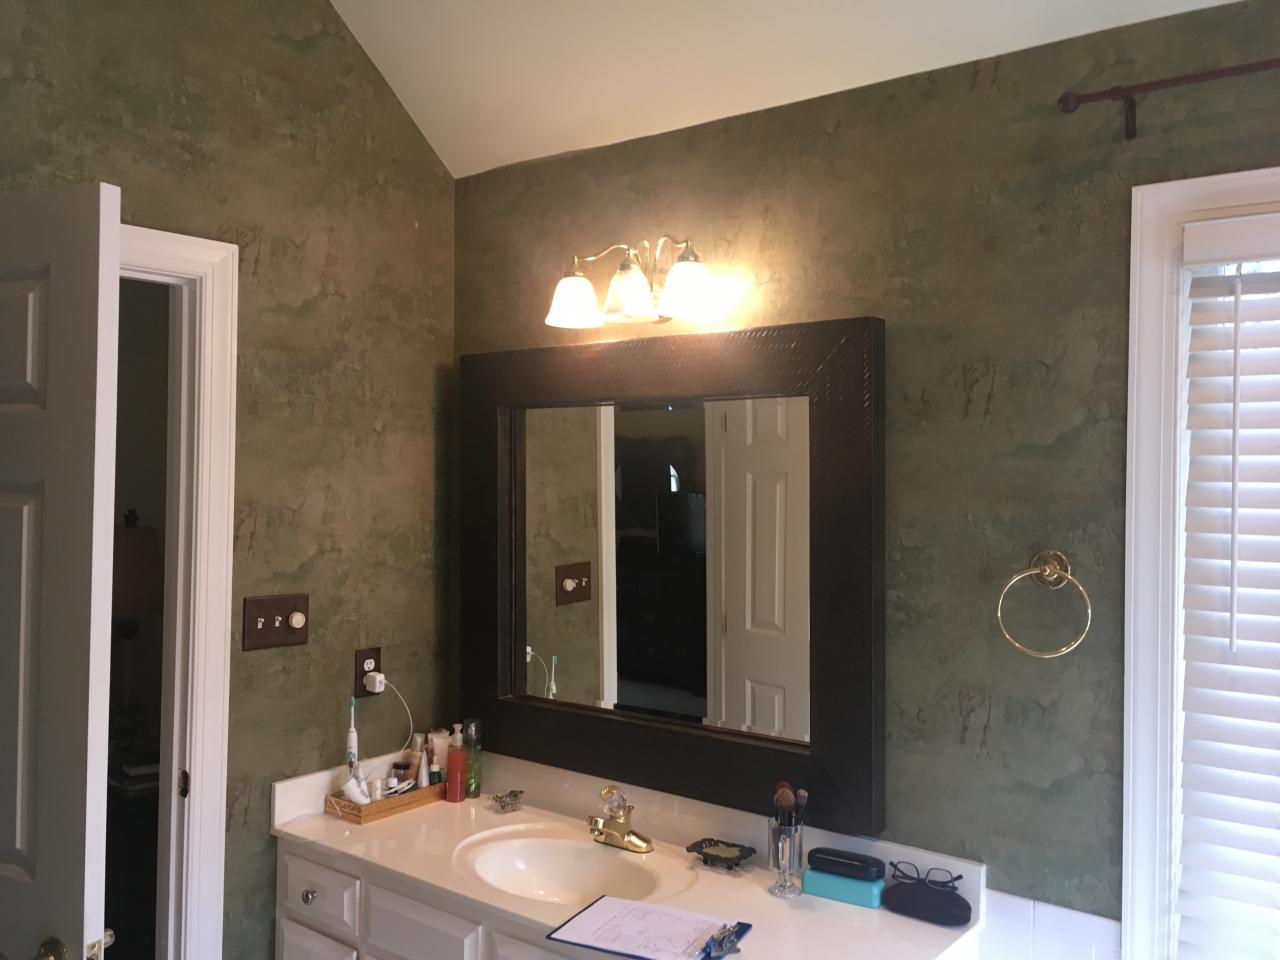 North Raleigh Bathroom Remodel A&M Remodeling, Inc.